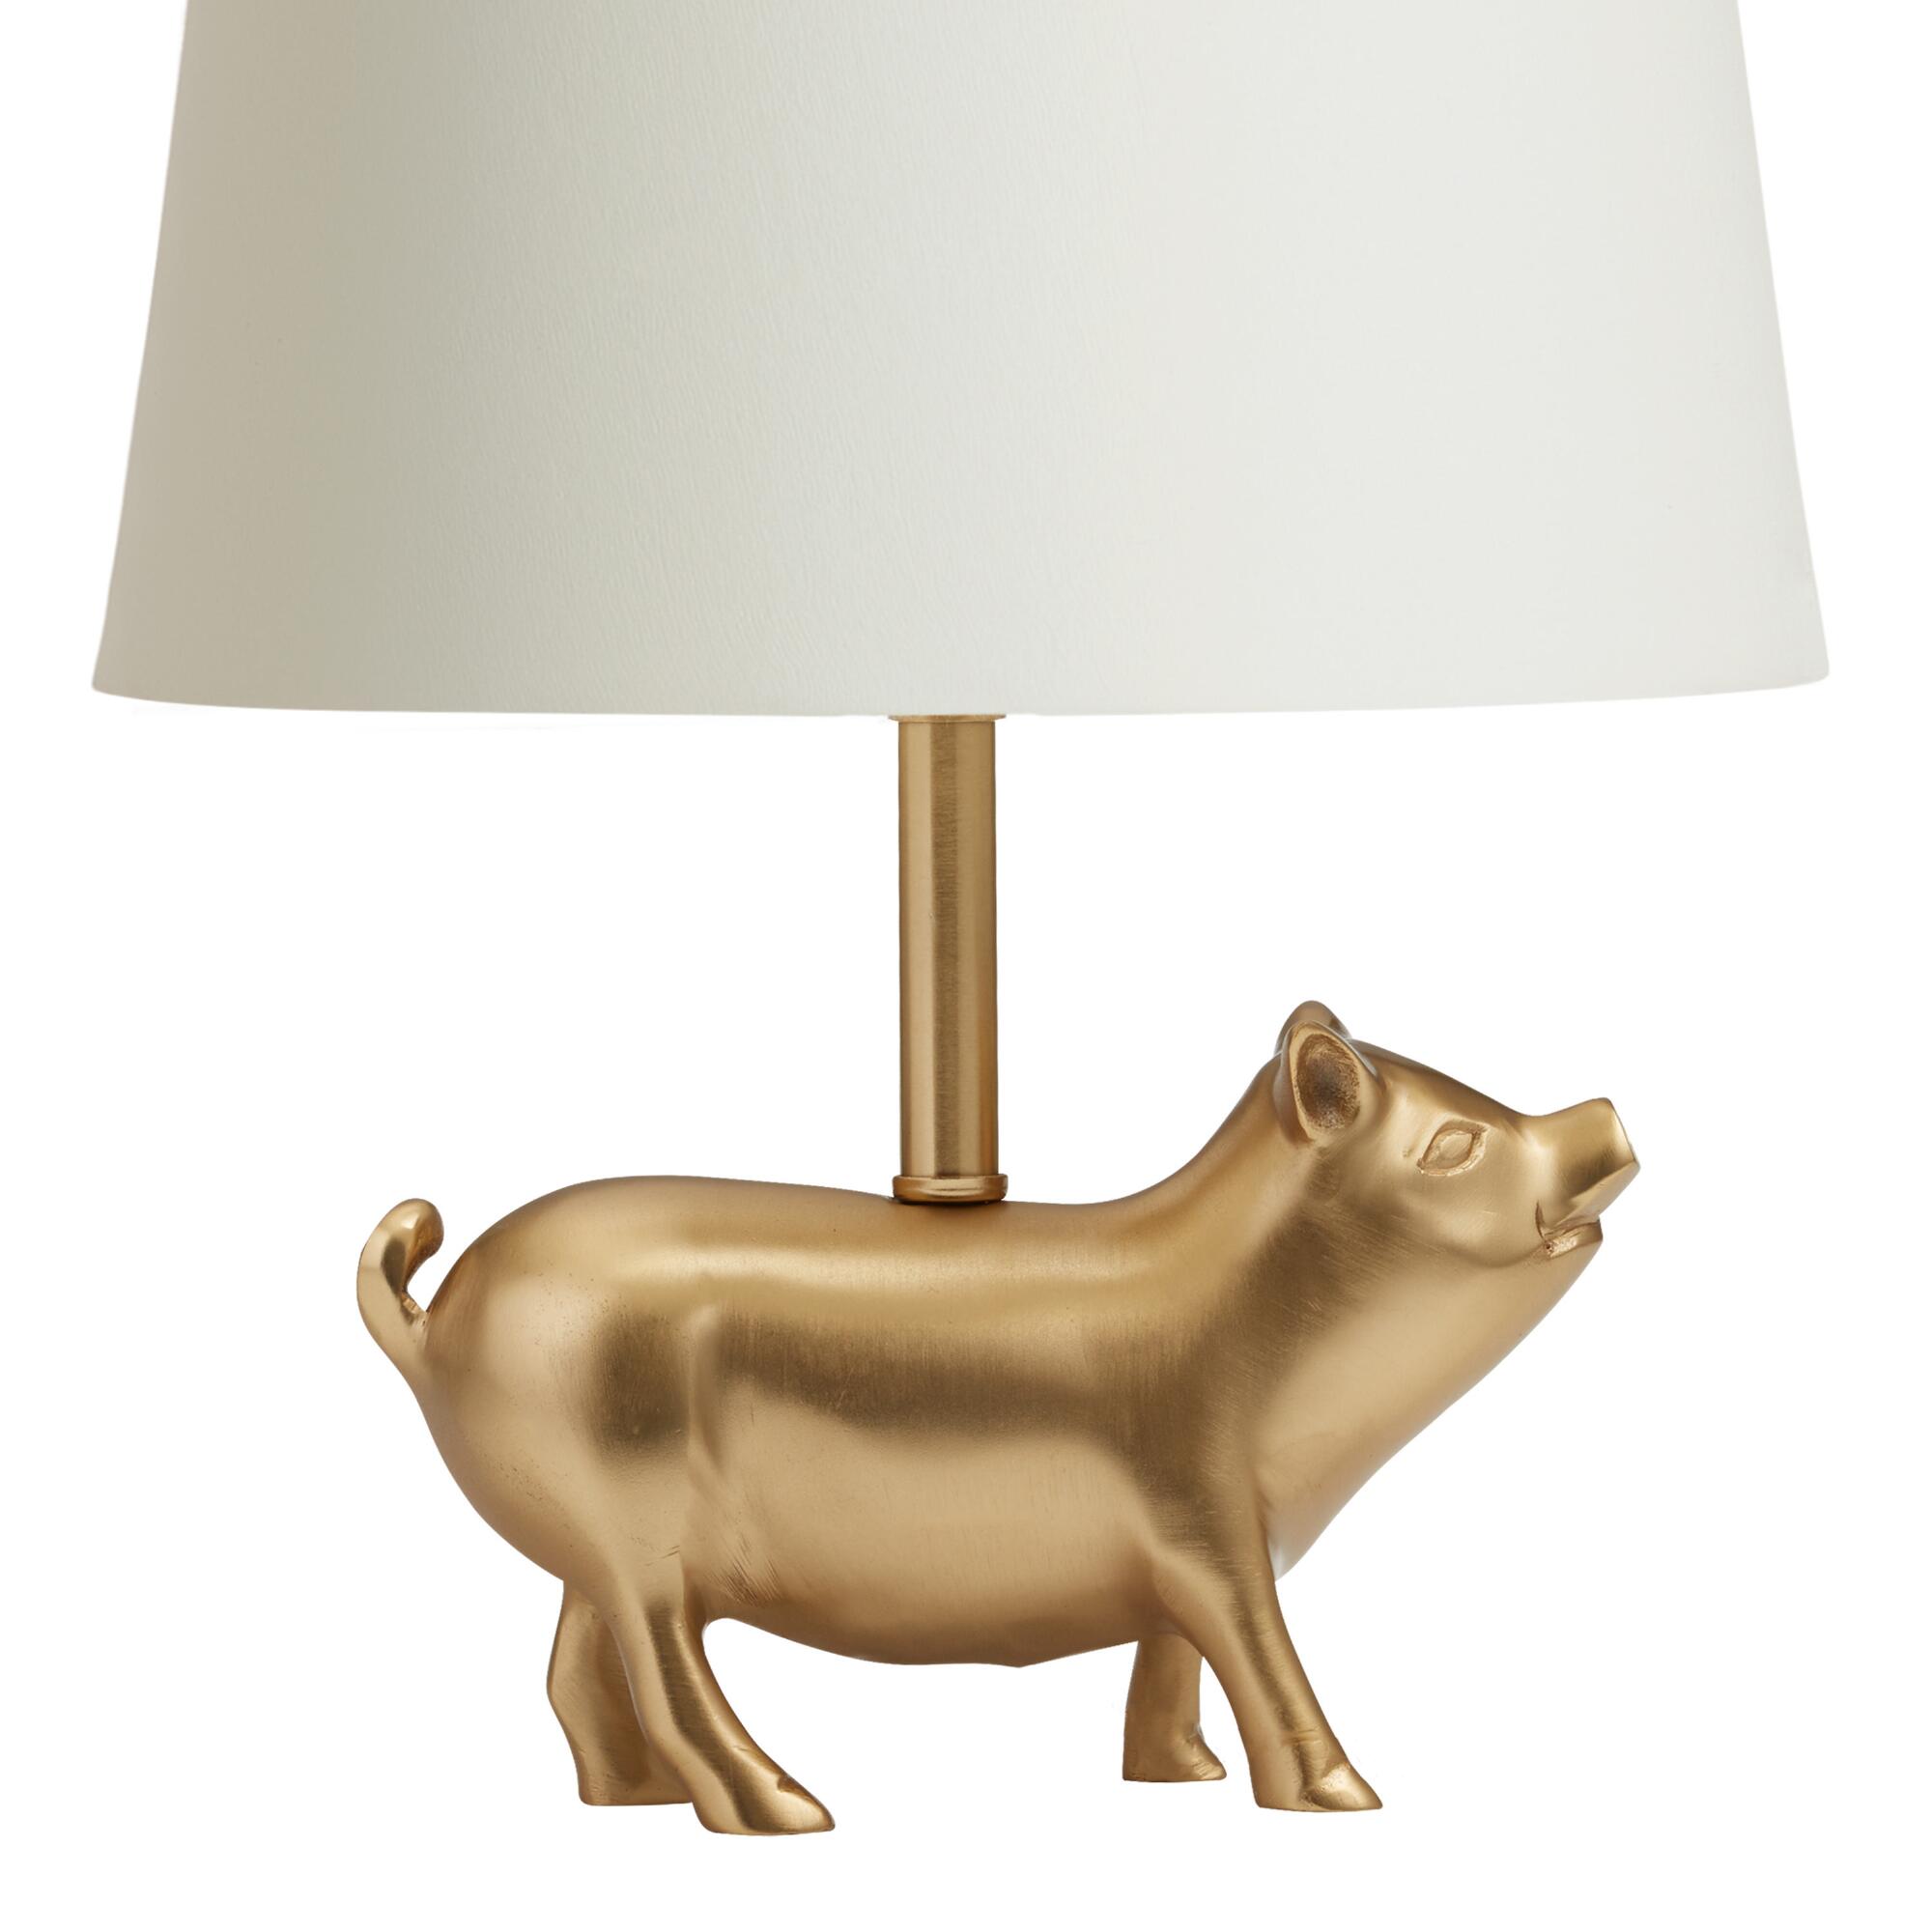 Gold Pig Accent Lamp Base - Metal - Small by World Market